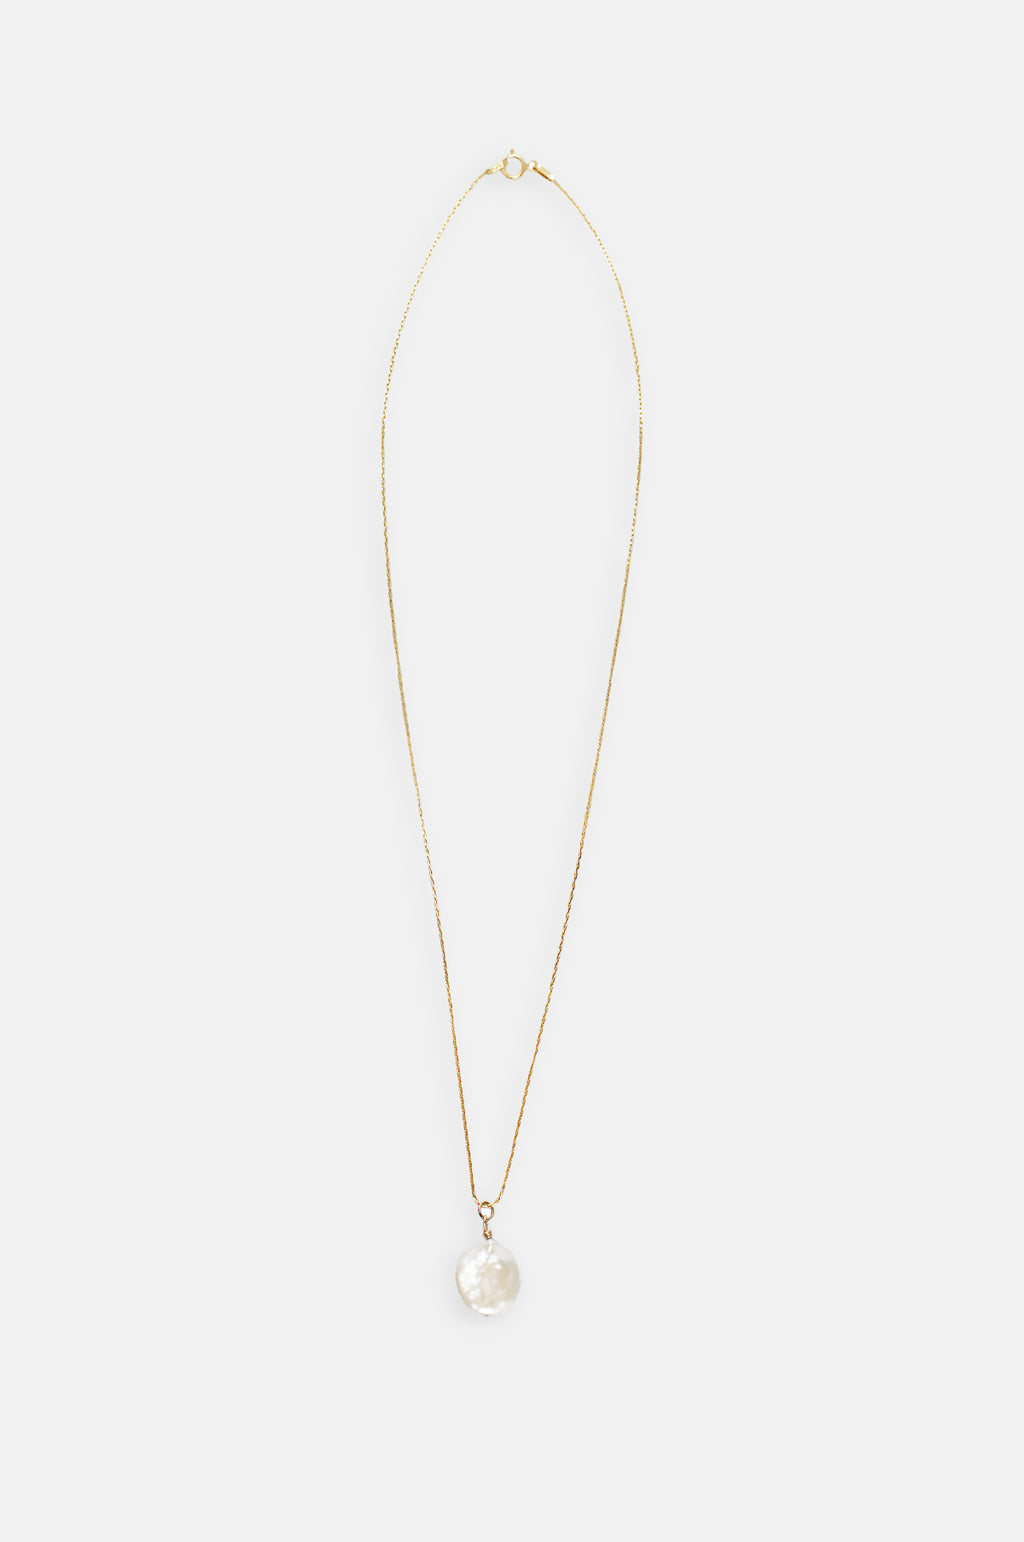 A product image of the Margaux Studios pearl drop necklace on a gold chain.